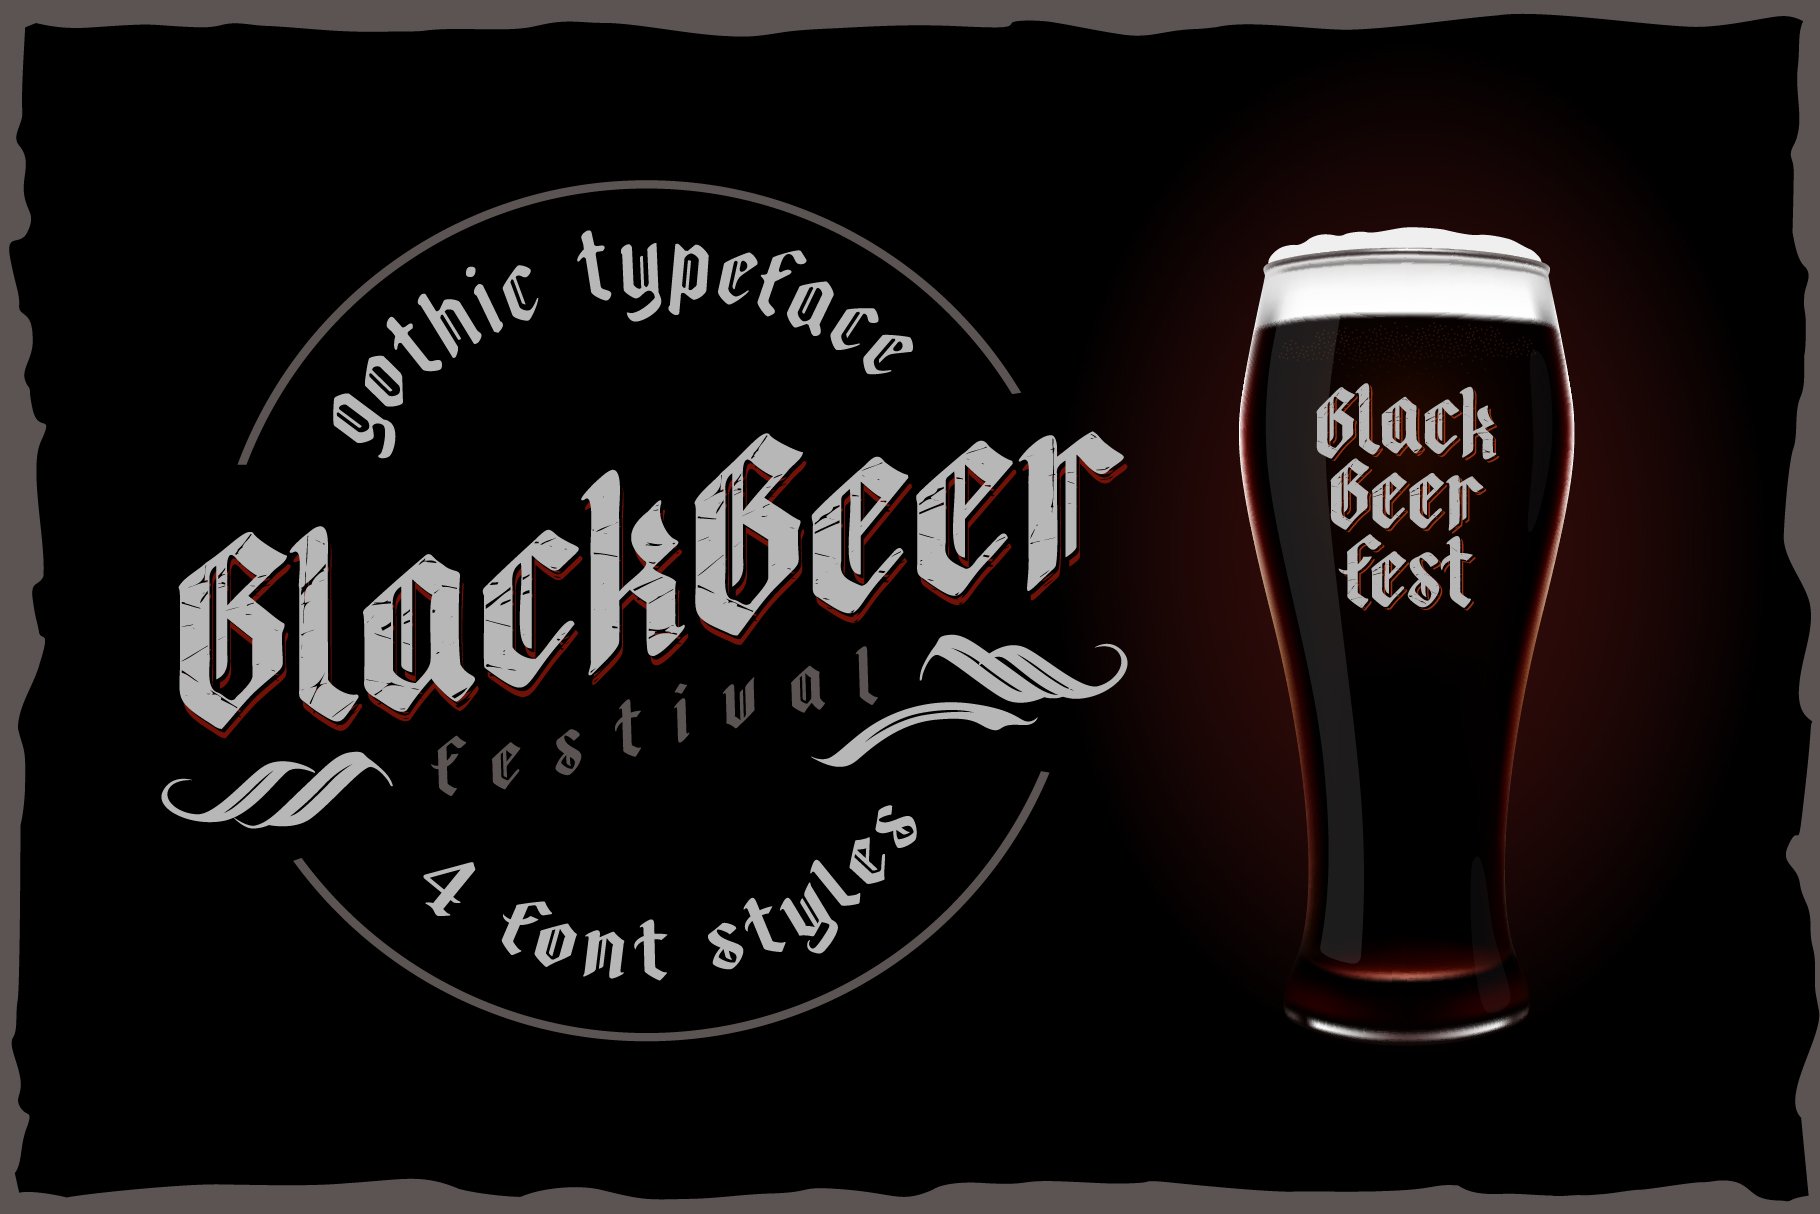 Blackbeer - strong gothic typeface cover image.